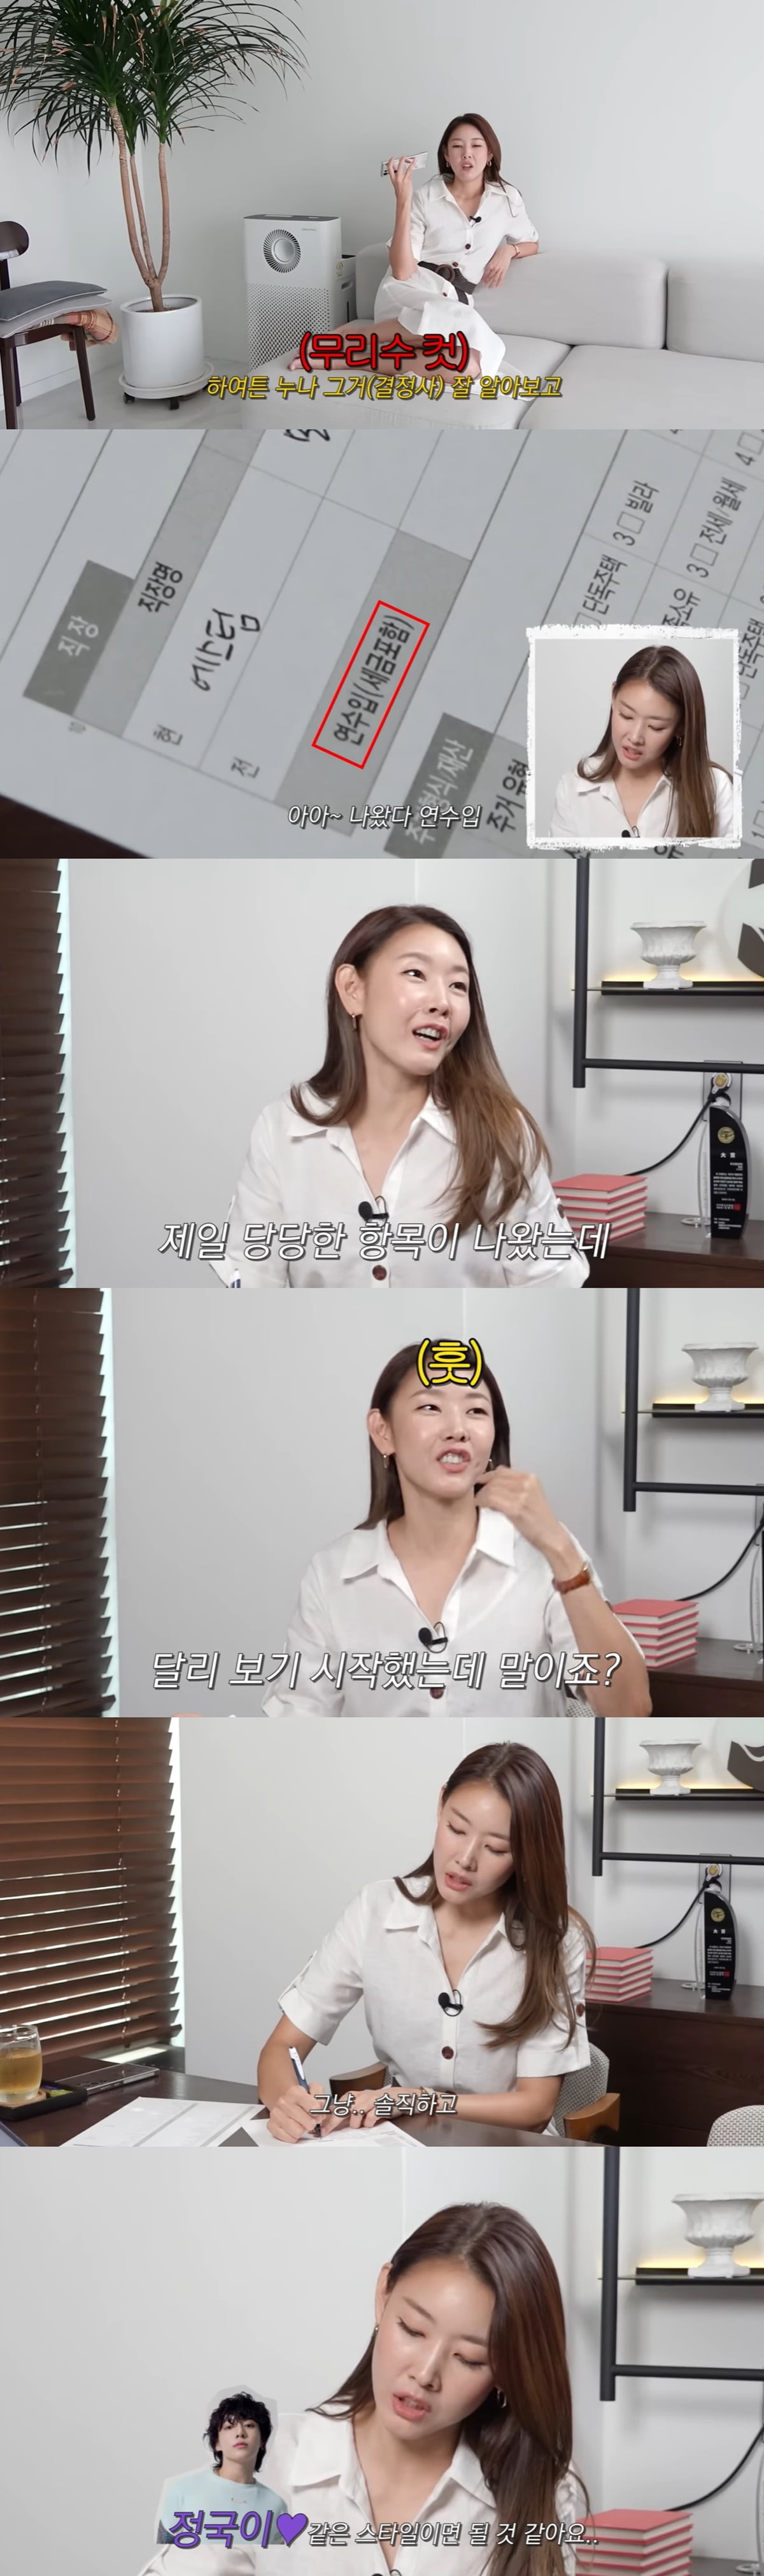 Han Hye-jin "Annual Income Special A, ideal type is BTS Jungkook"